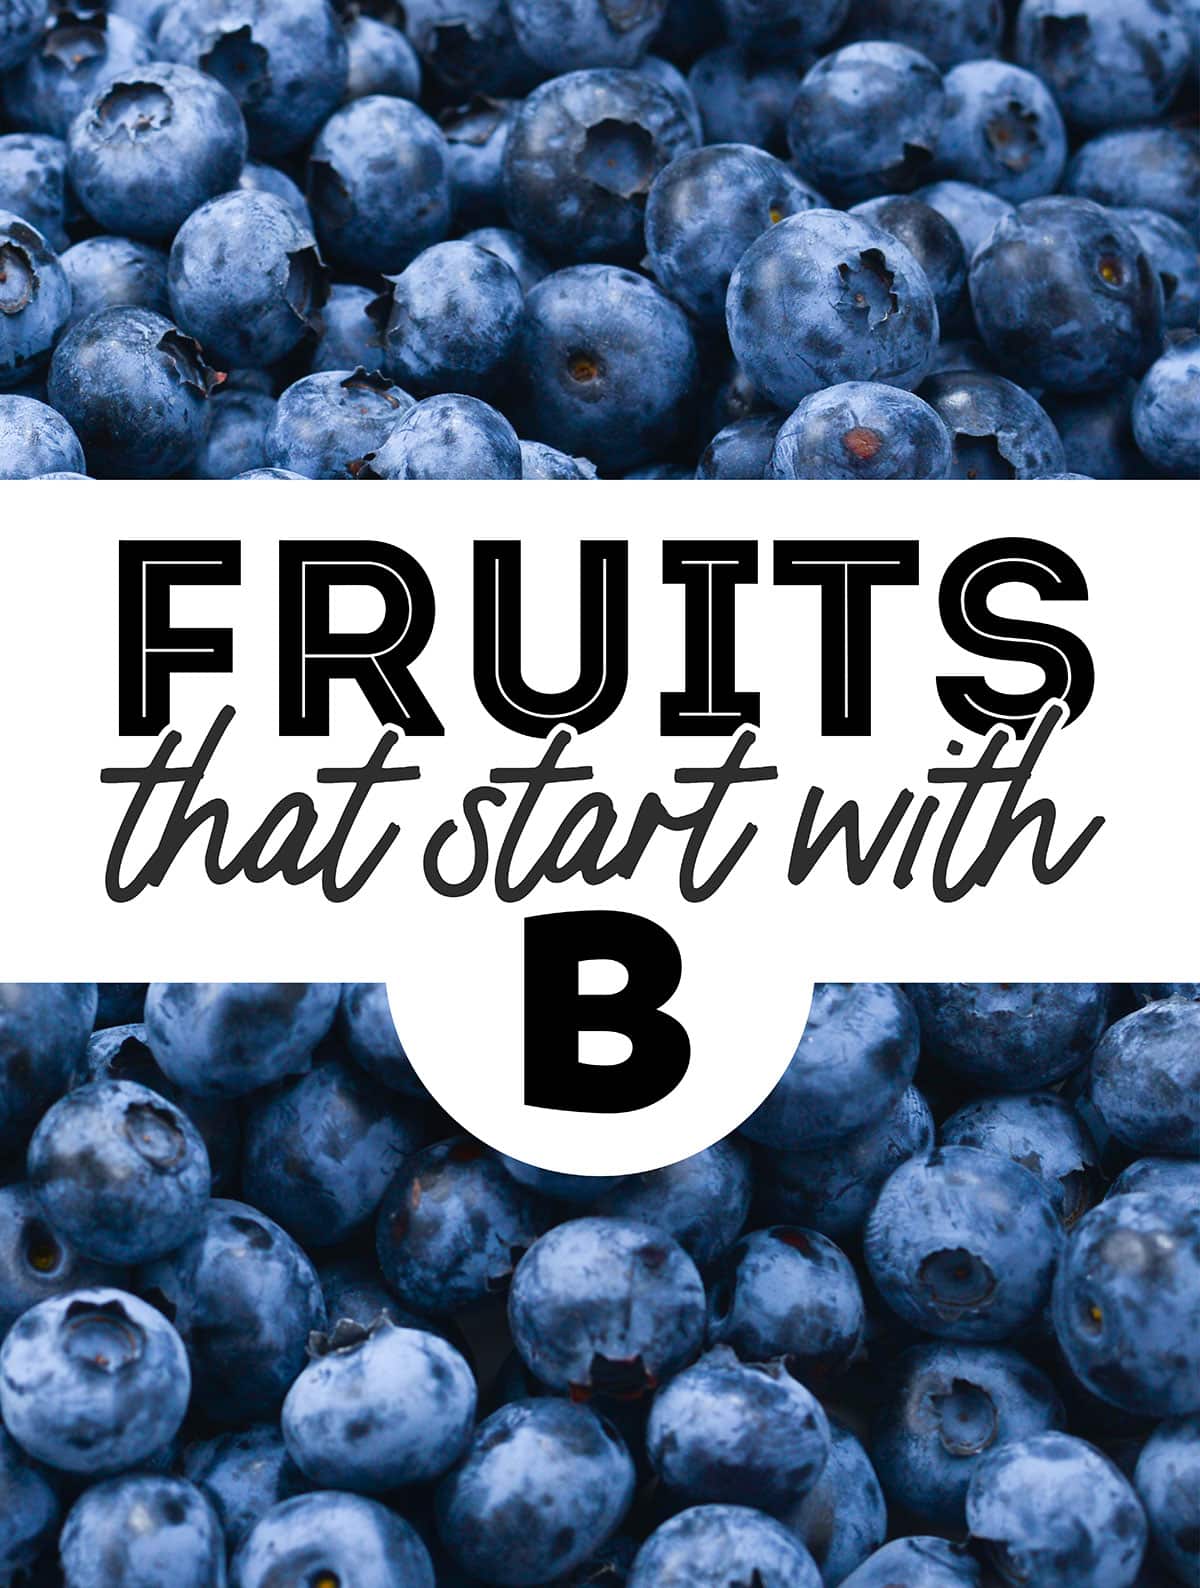 Collage that says "Fruits That Start With B".